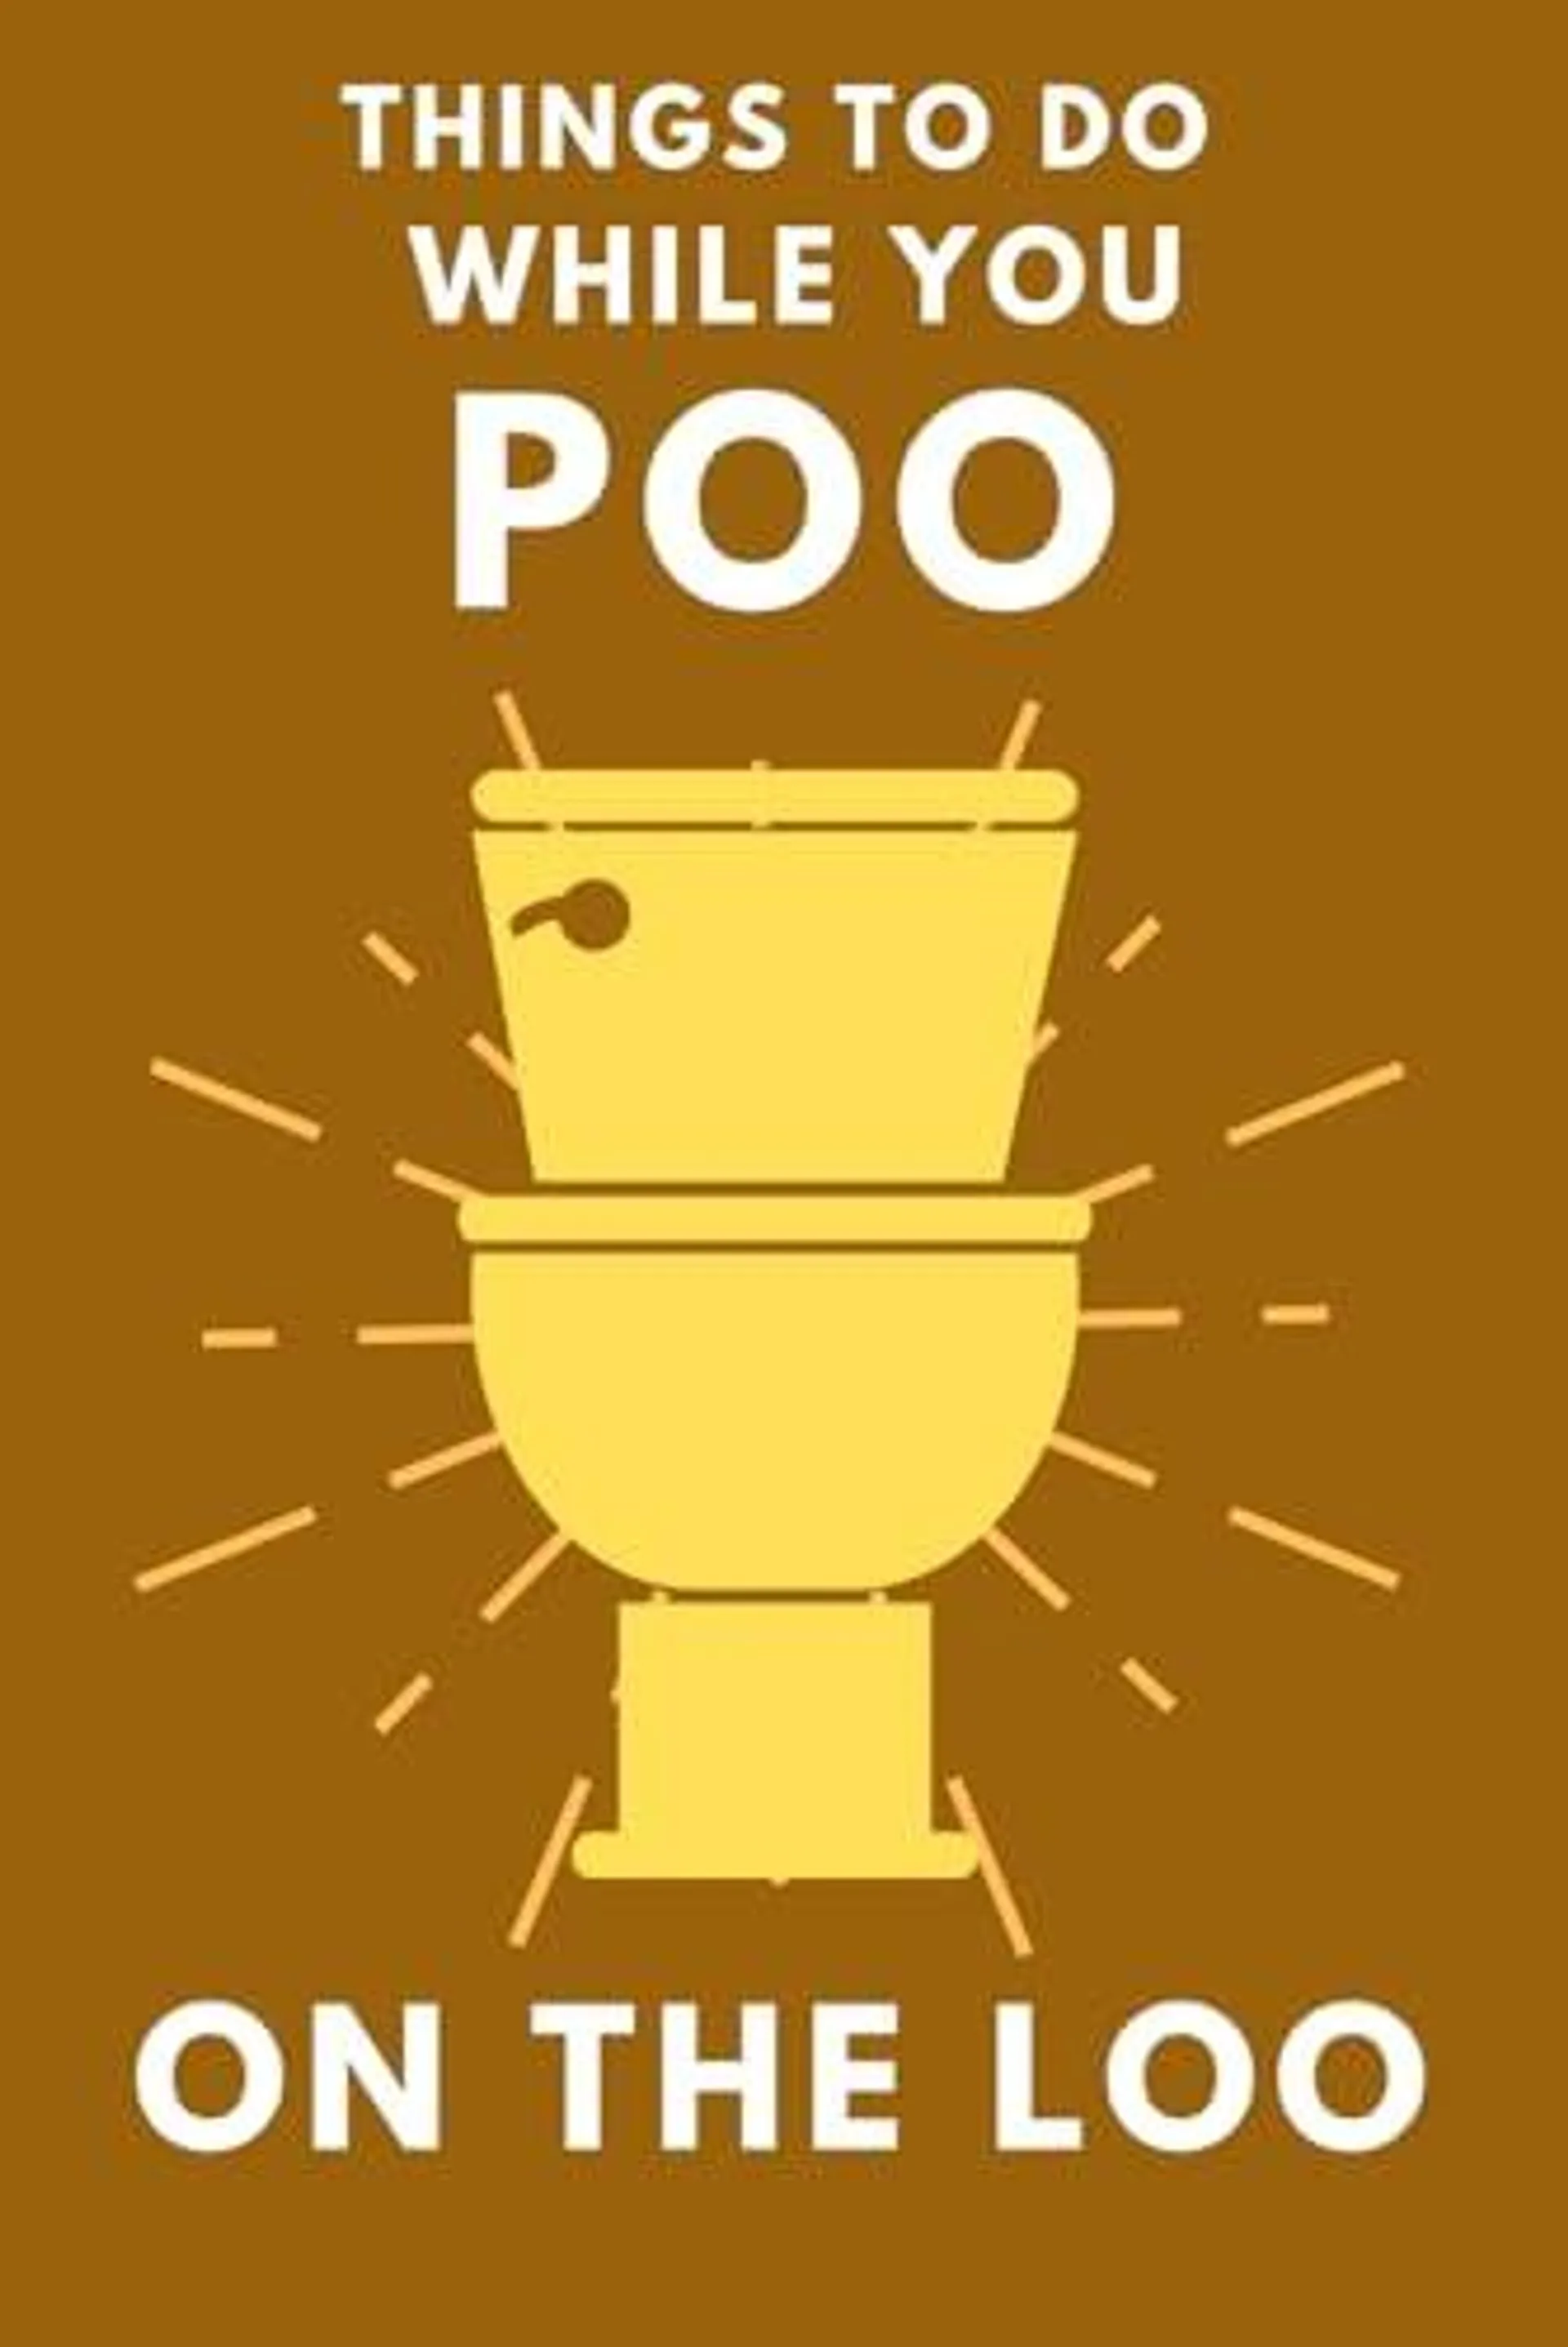 Things To Do While You Poo On The Loo by Alex Smart